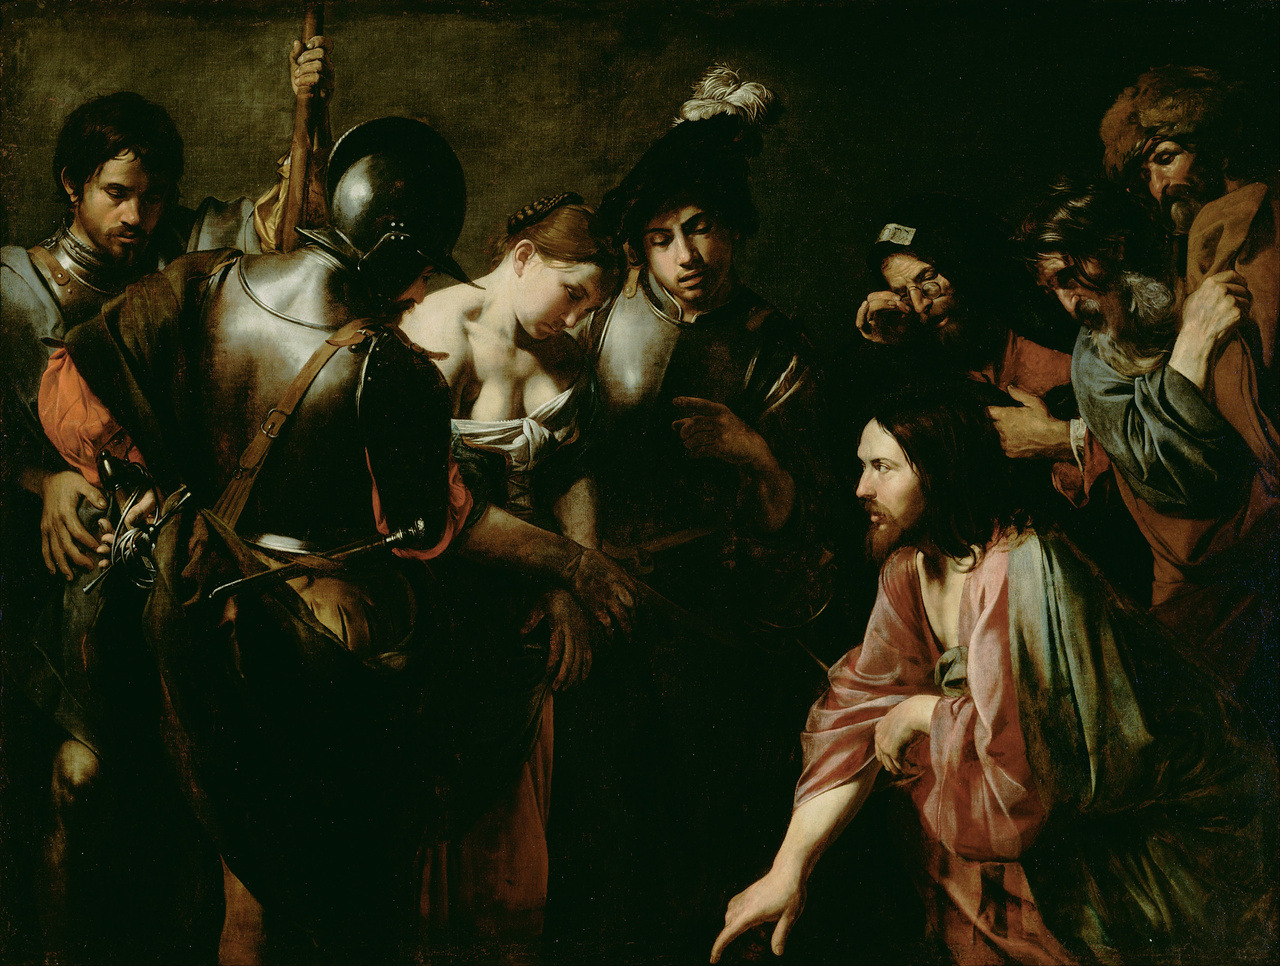 Valentin de Boulogne (French, active in Rome, 1591-1632), Christ and the Adulteress,